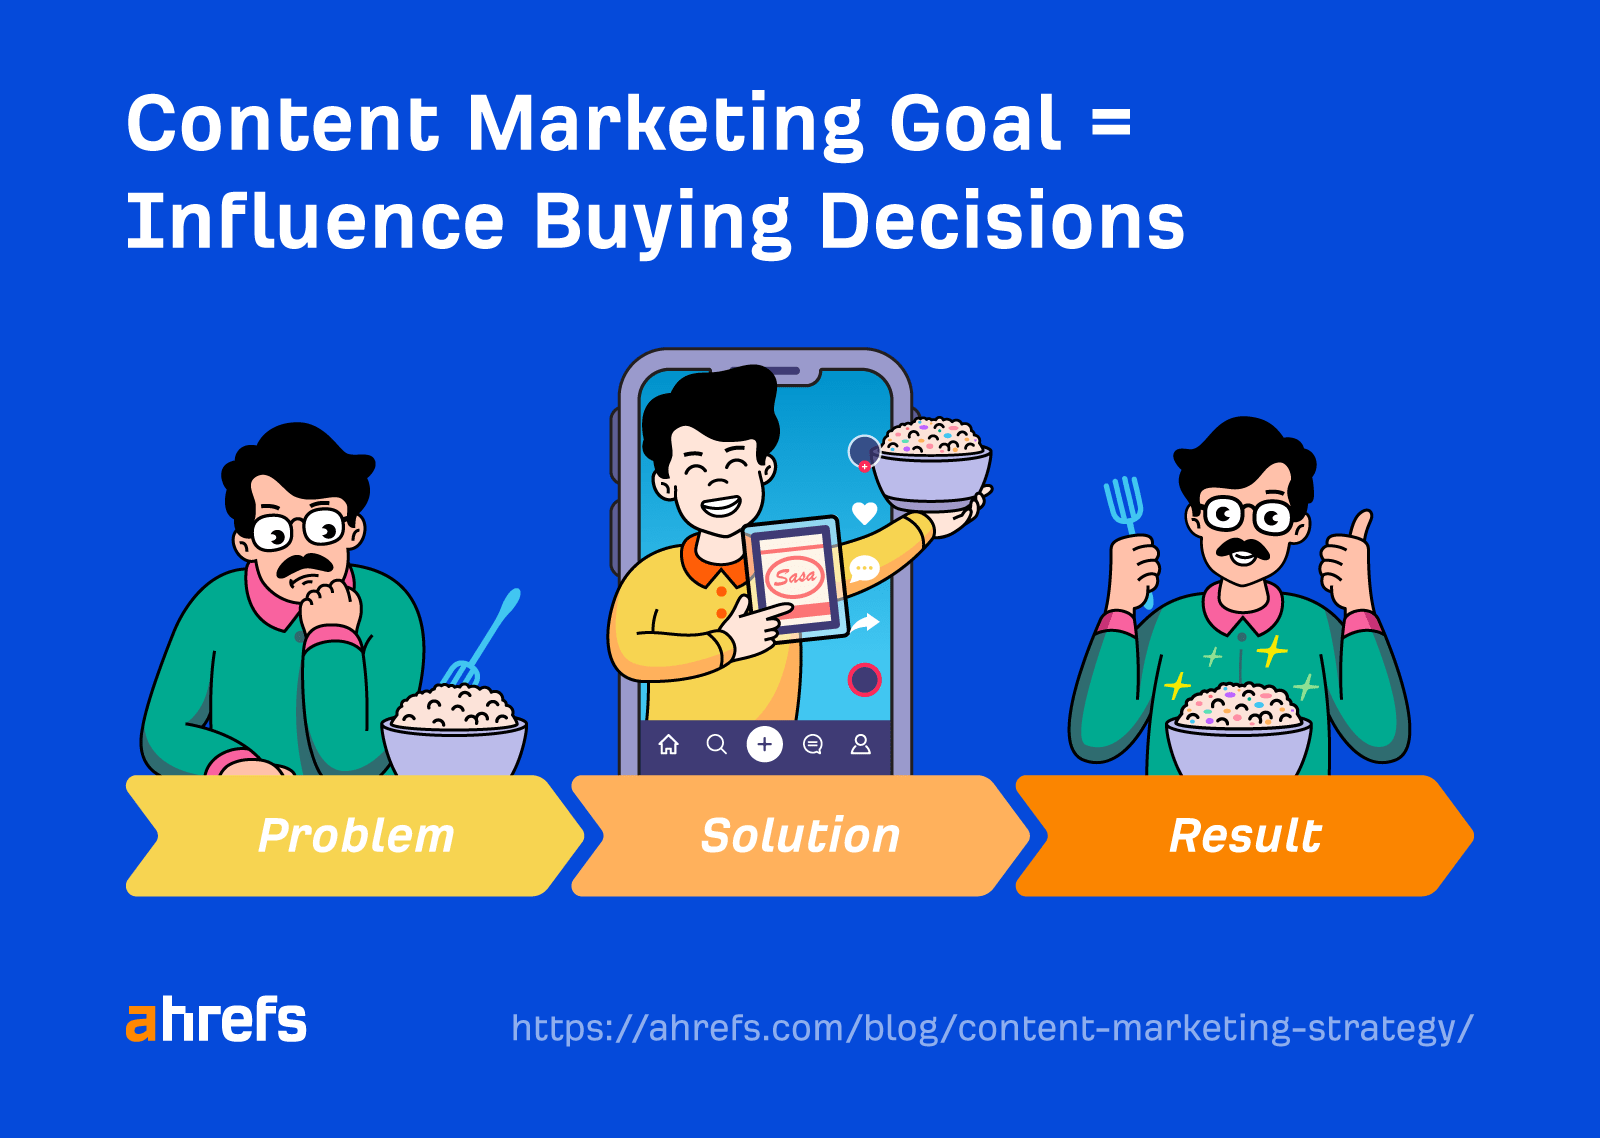 Influencing buying decisions is the goal of content marketing